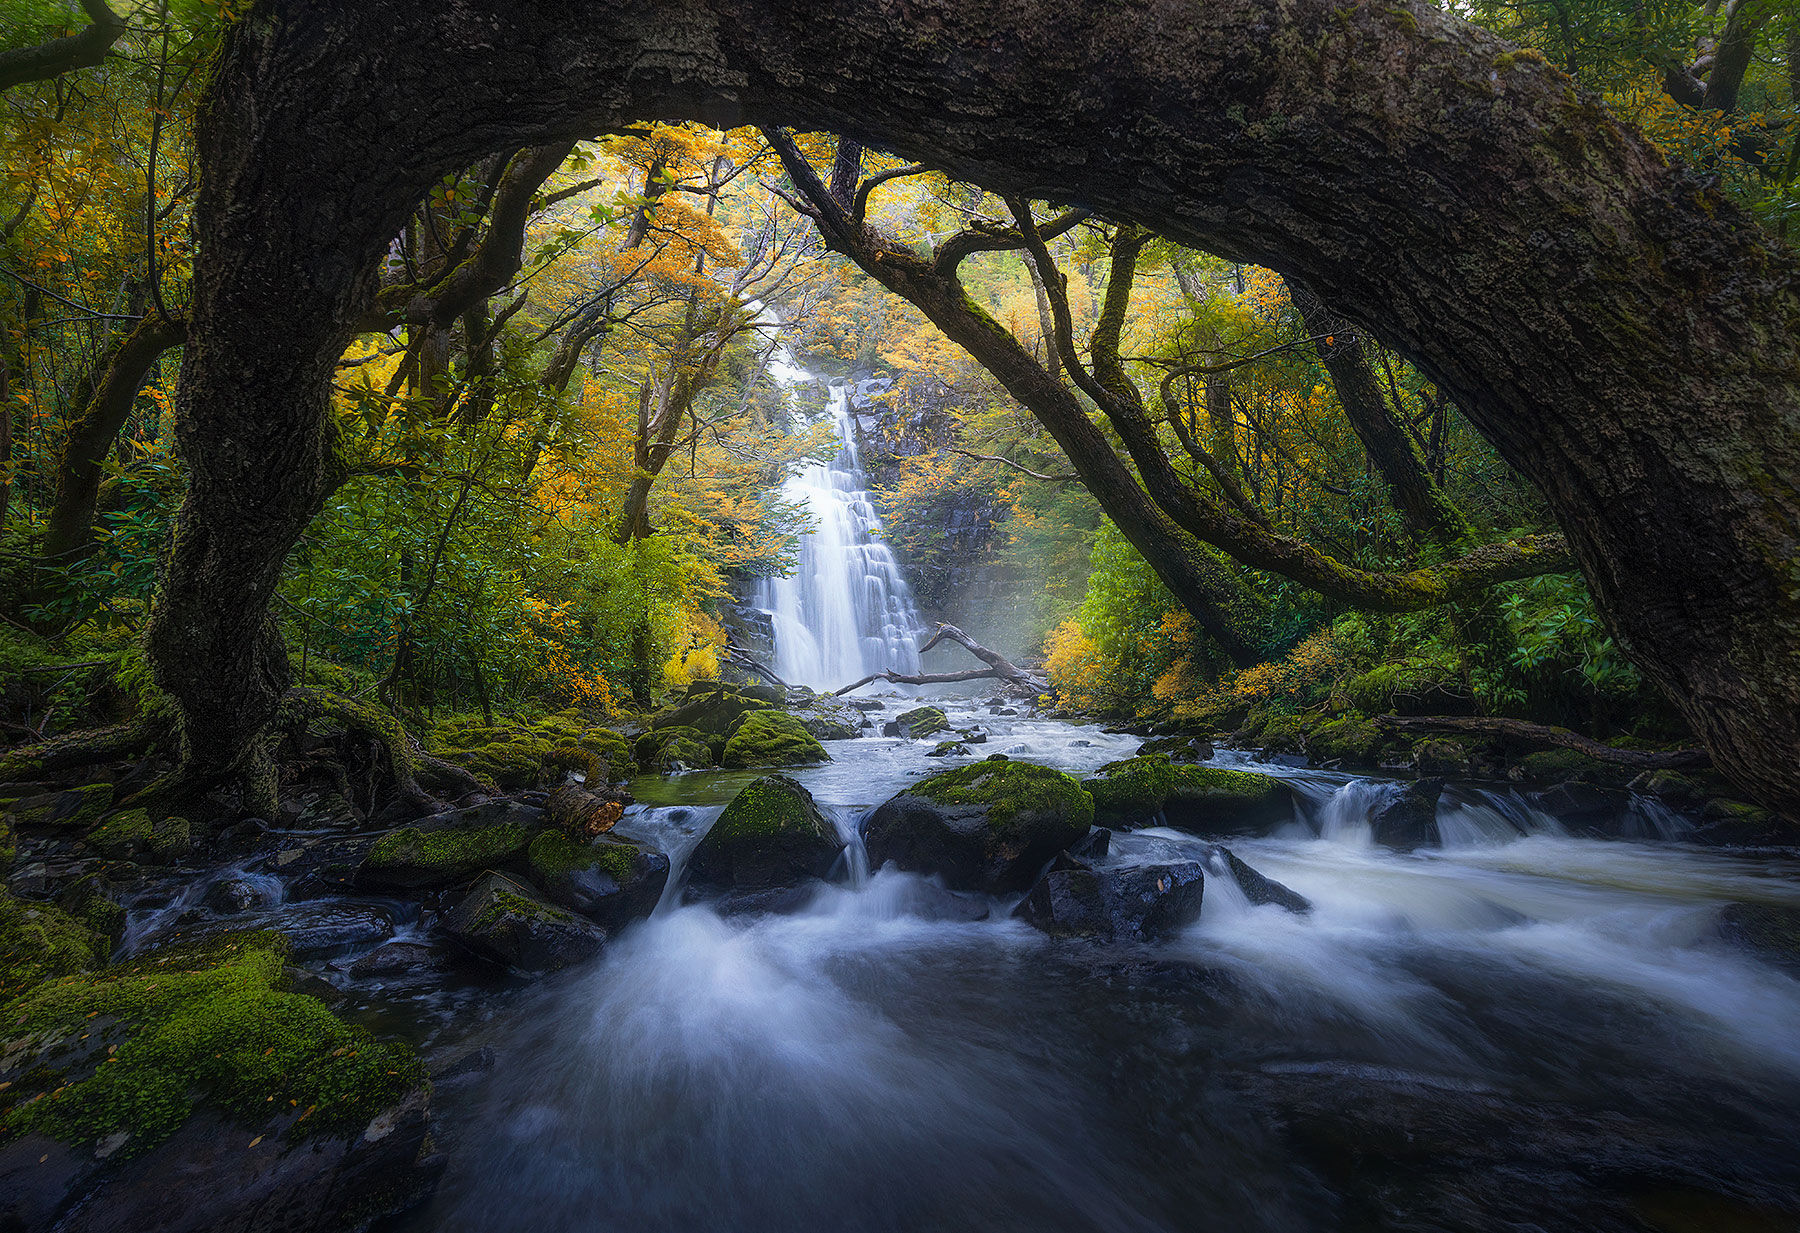 Coigue forest frames a waterfall that has probably never been seen before in the remote reaches of Patagonian Fjords